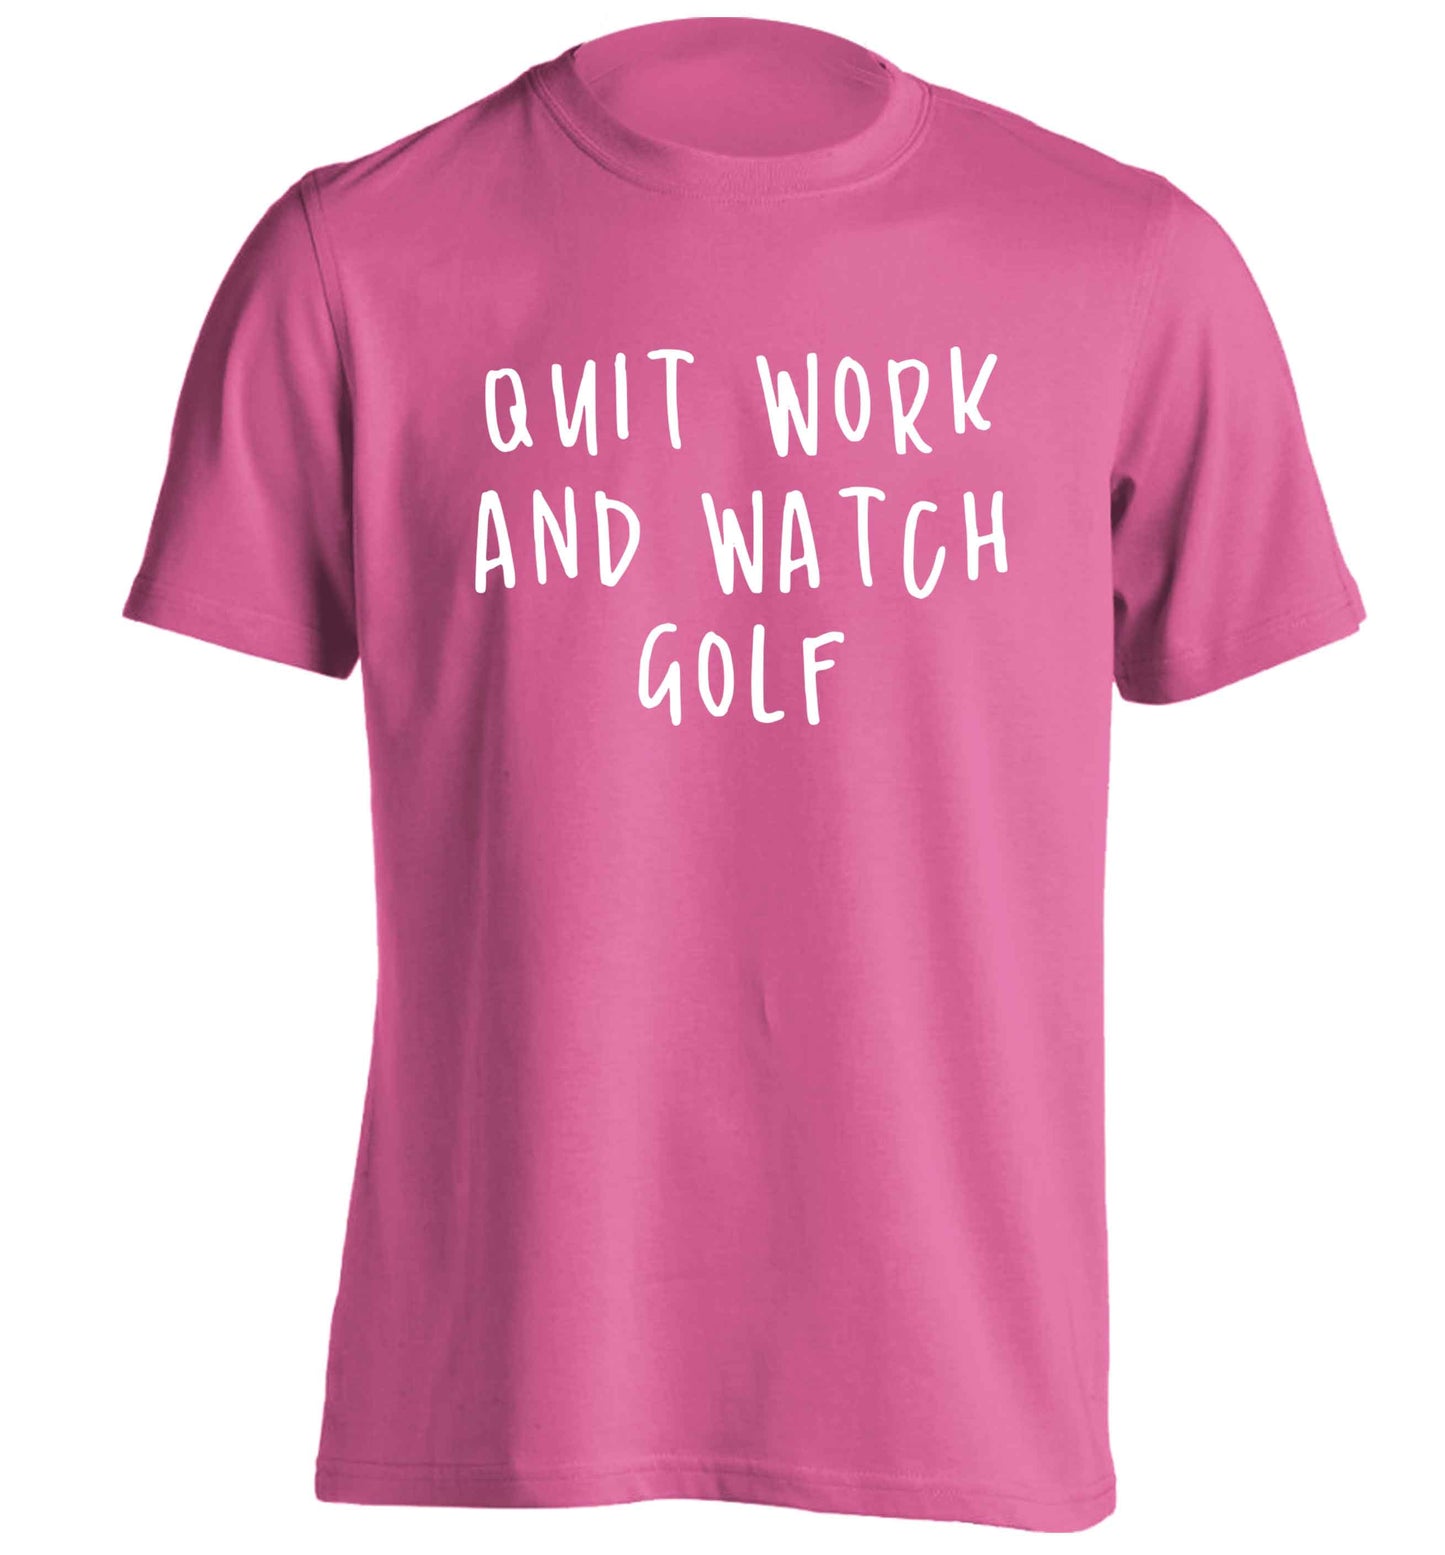 Quit work and watch golf adults unisex pink Tshirt 2XL